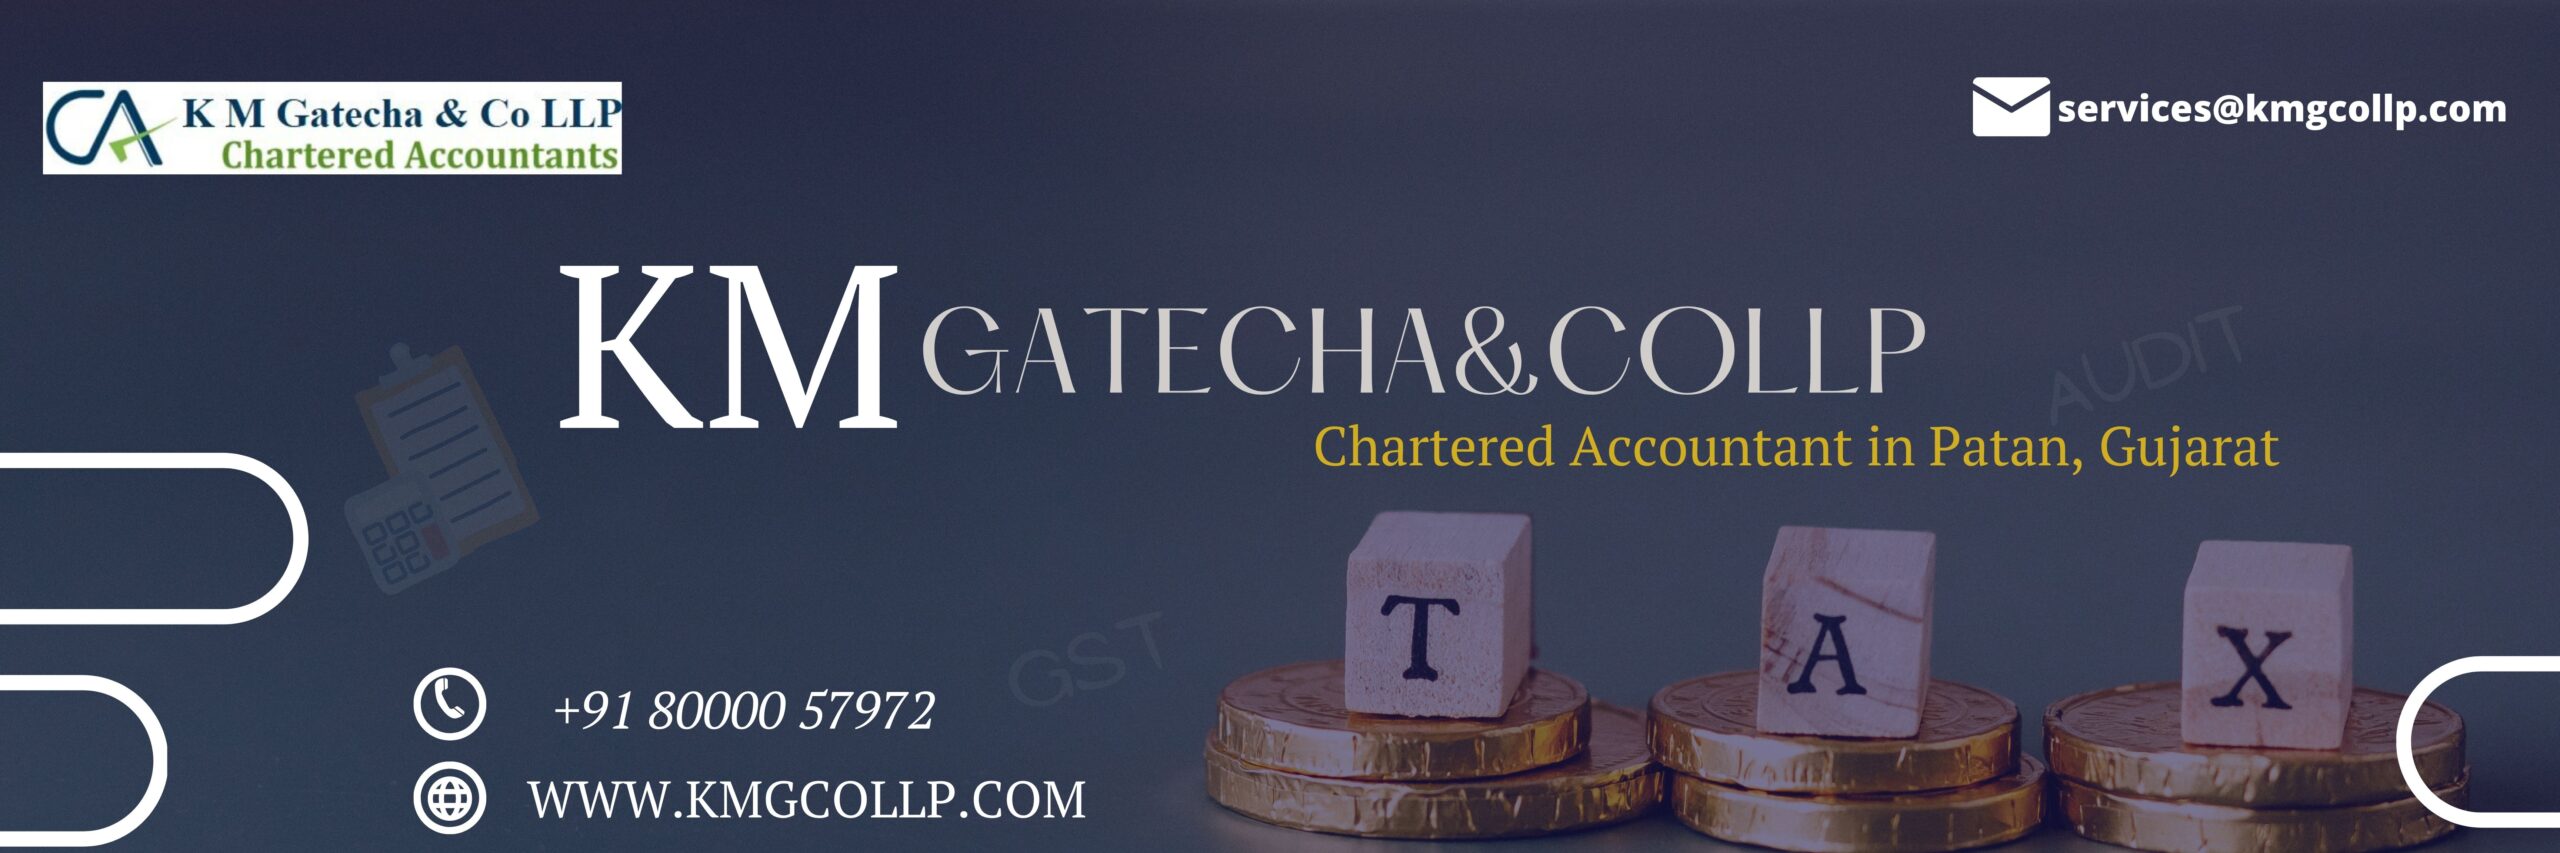 ca chartered accountant in patan